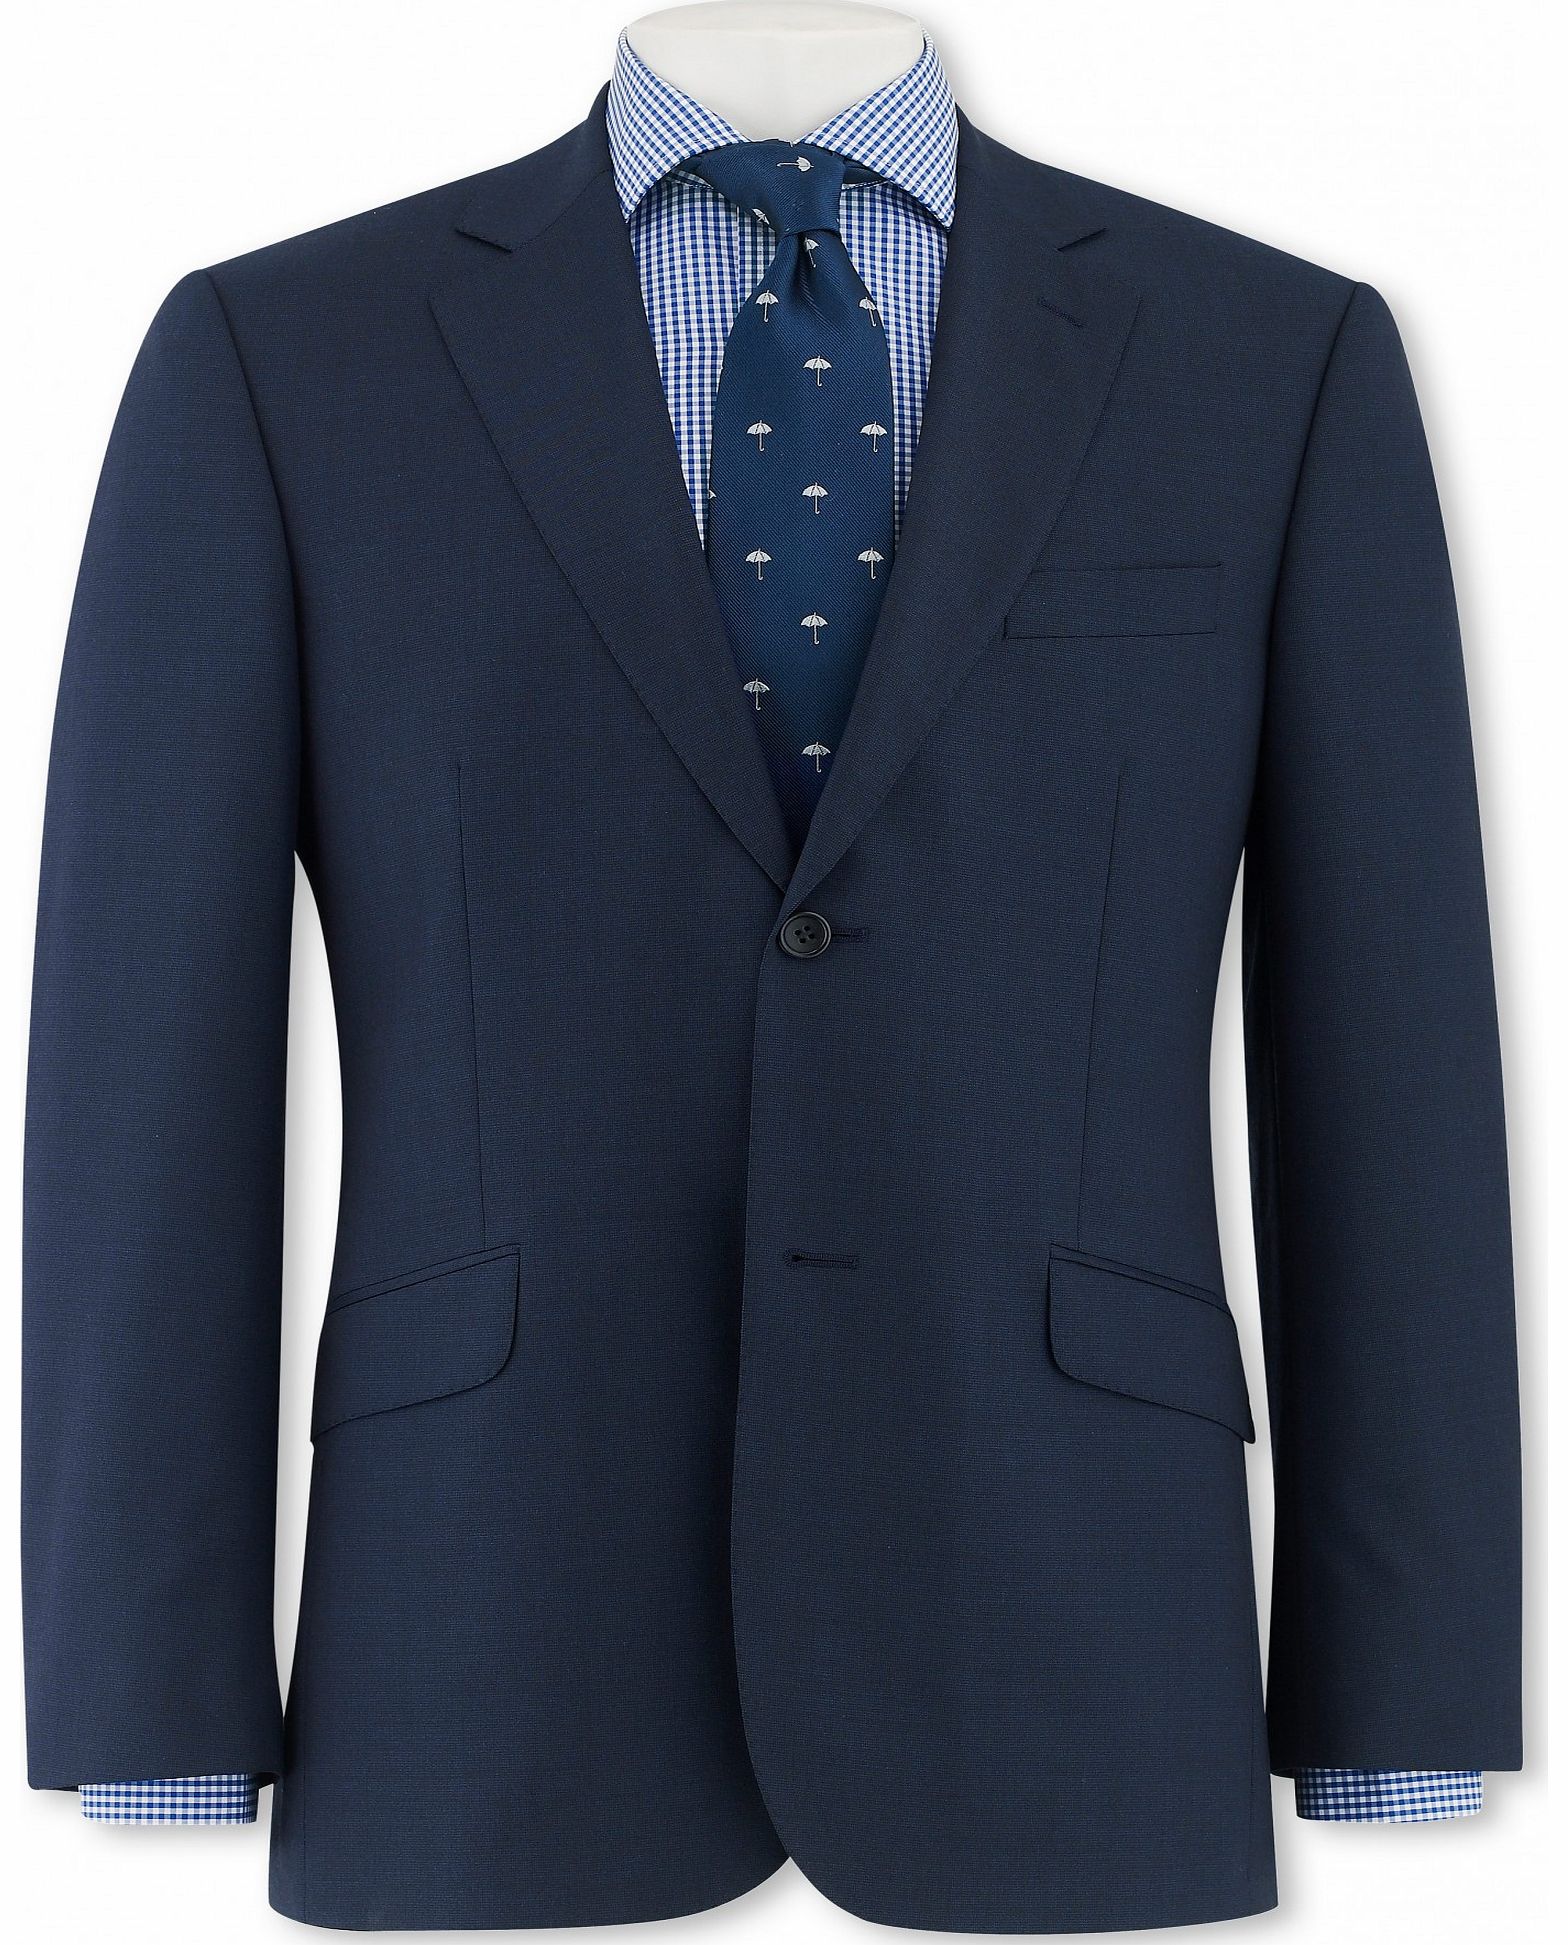 Navy Microdot Suit Jacket 44`` Long